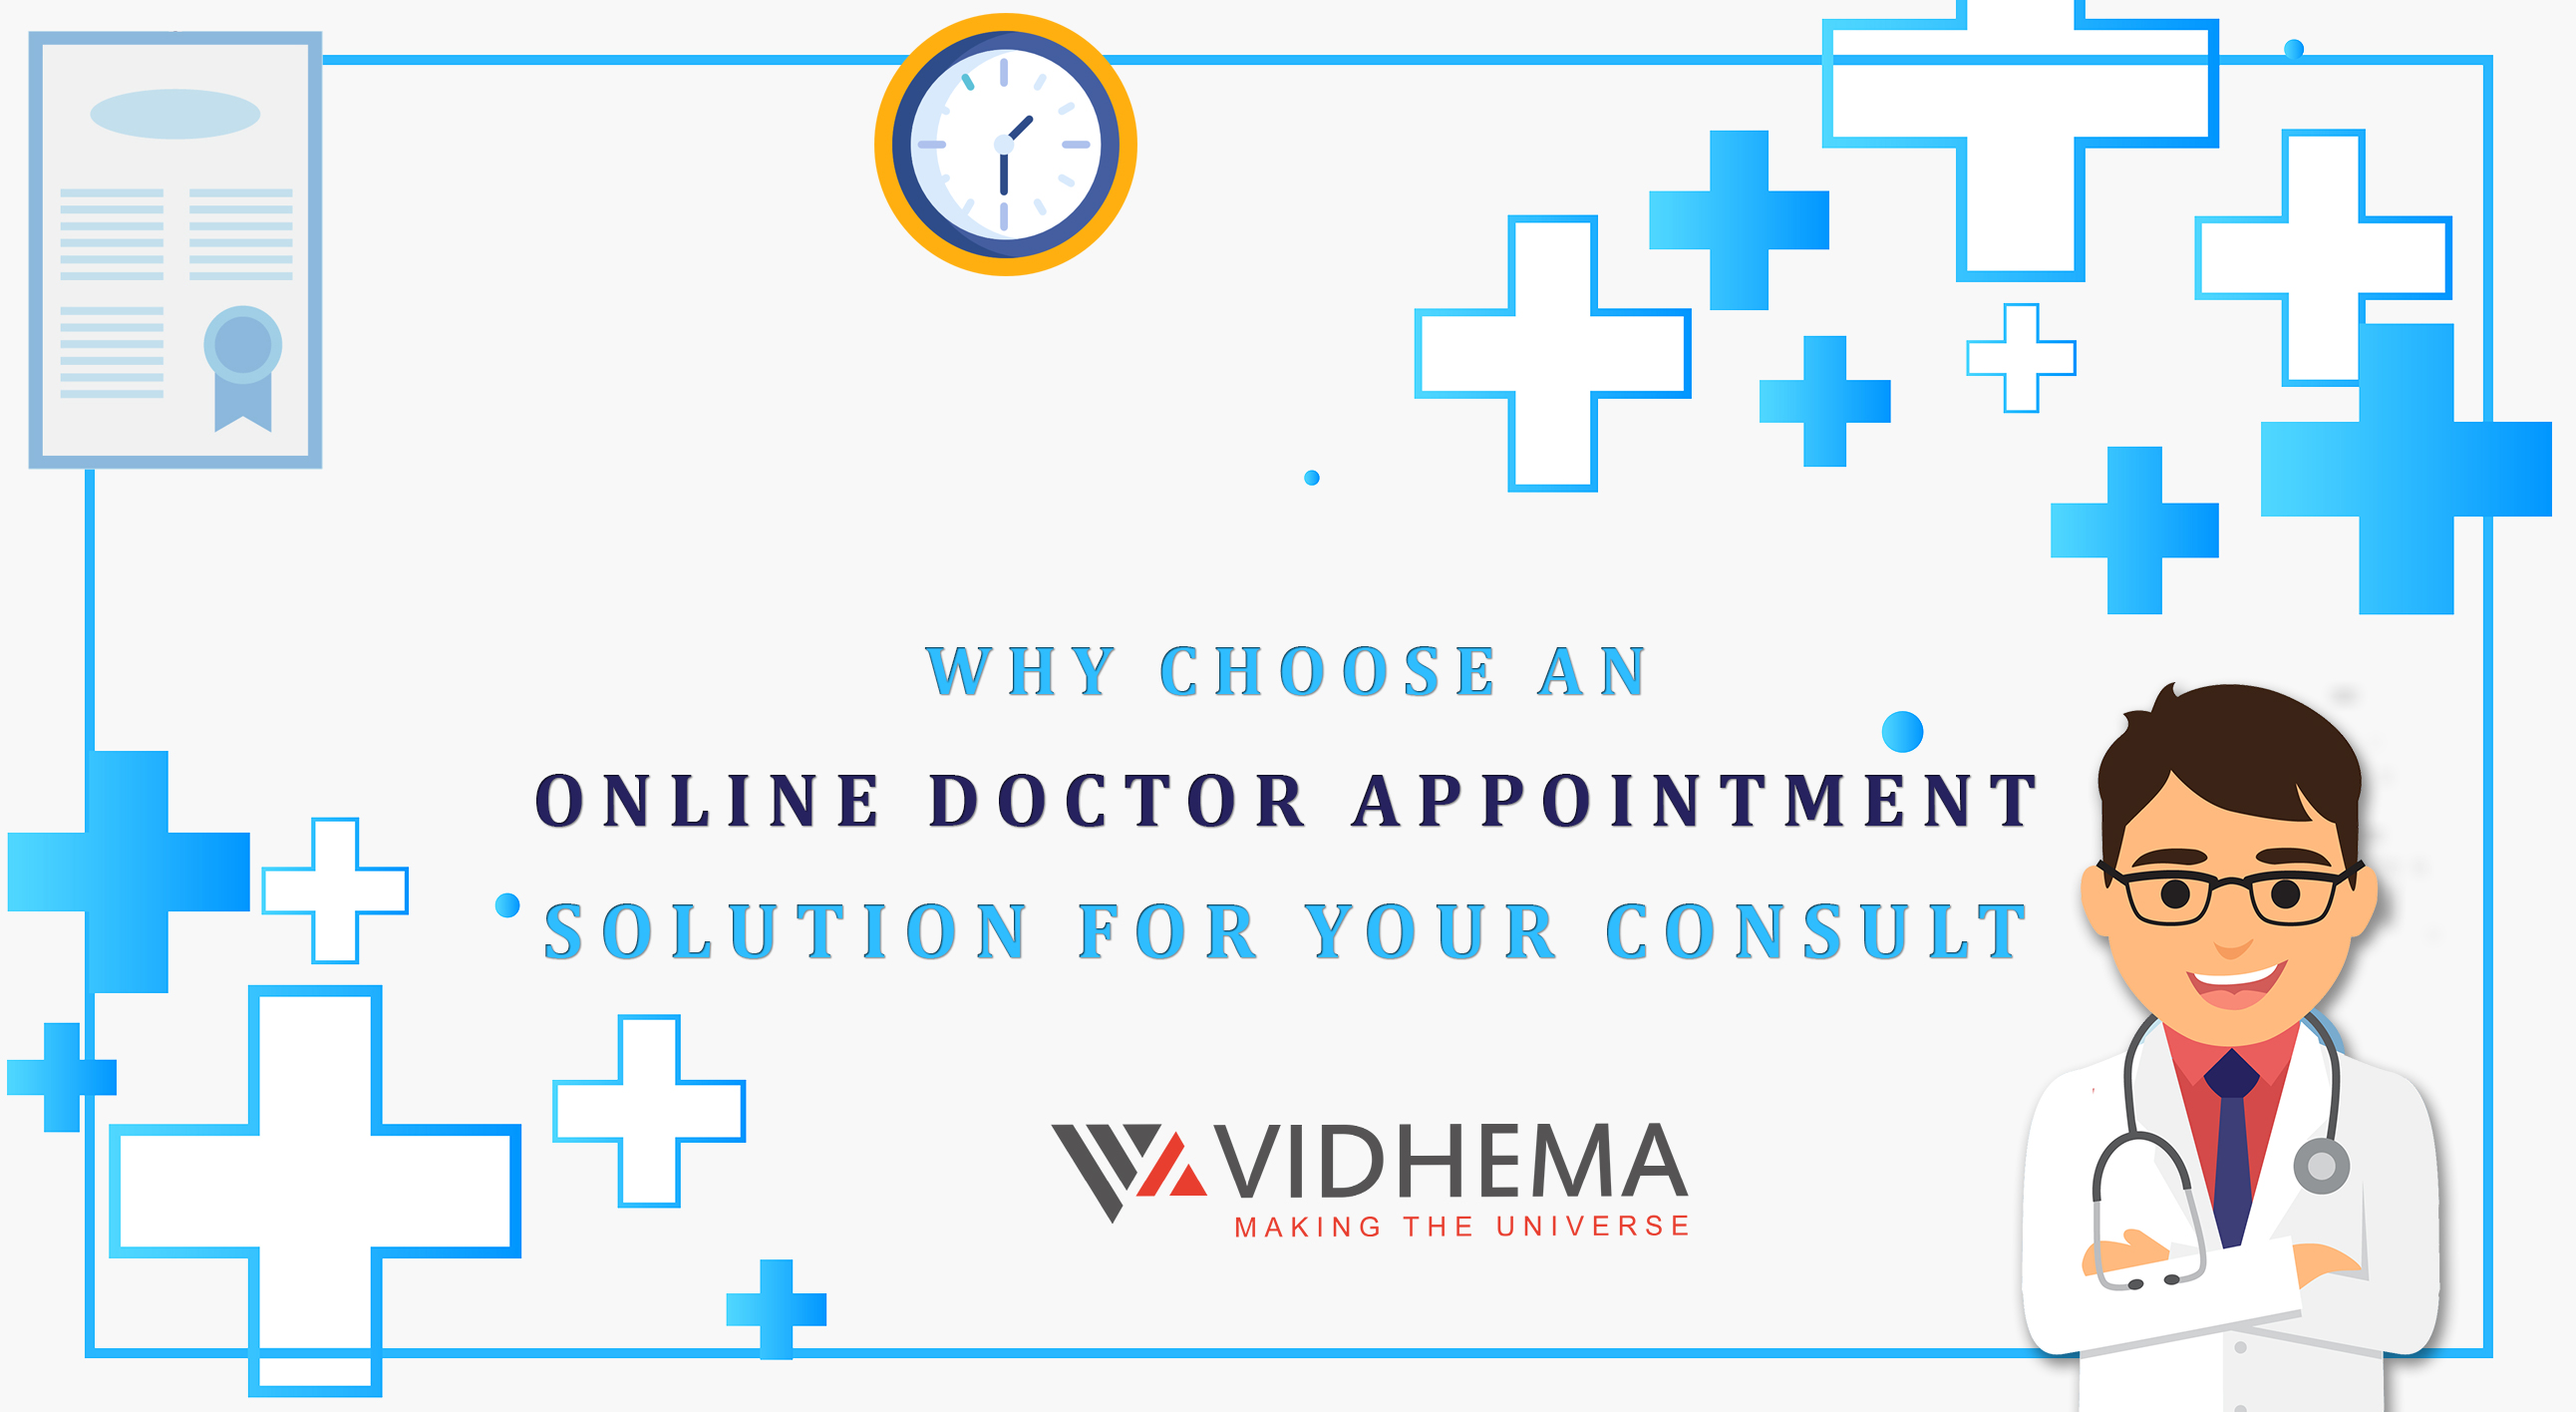 Why Choose An Online Doctor Appointment Solution For Your Consult?